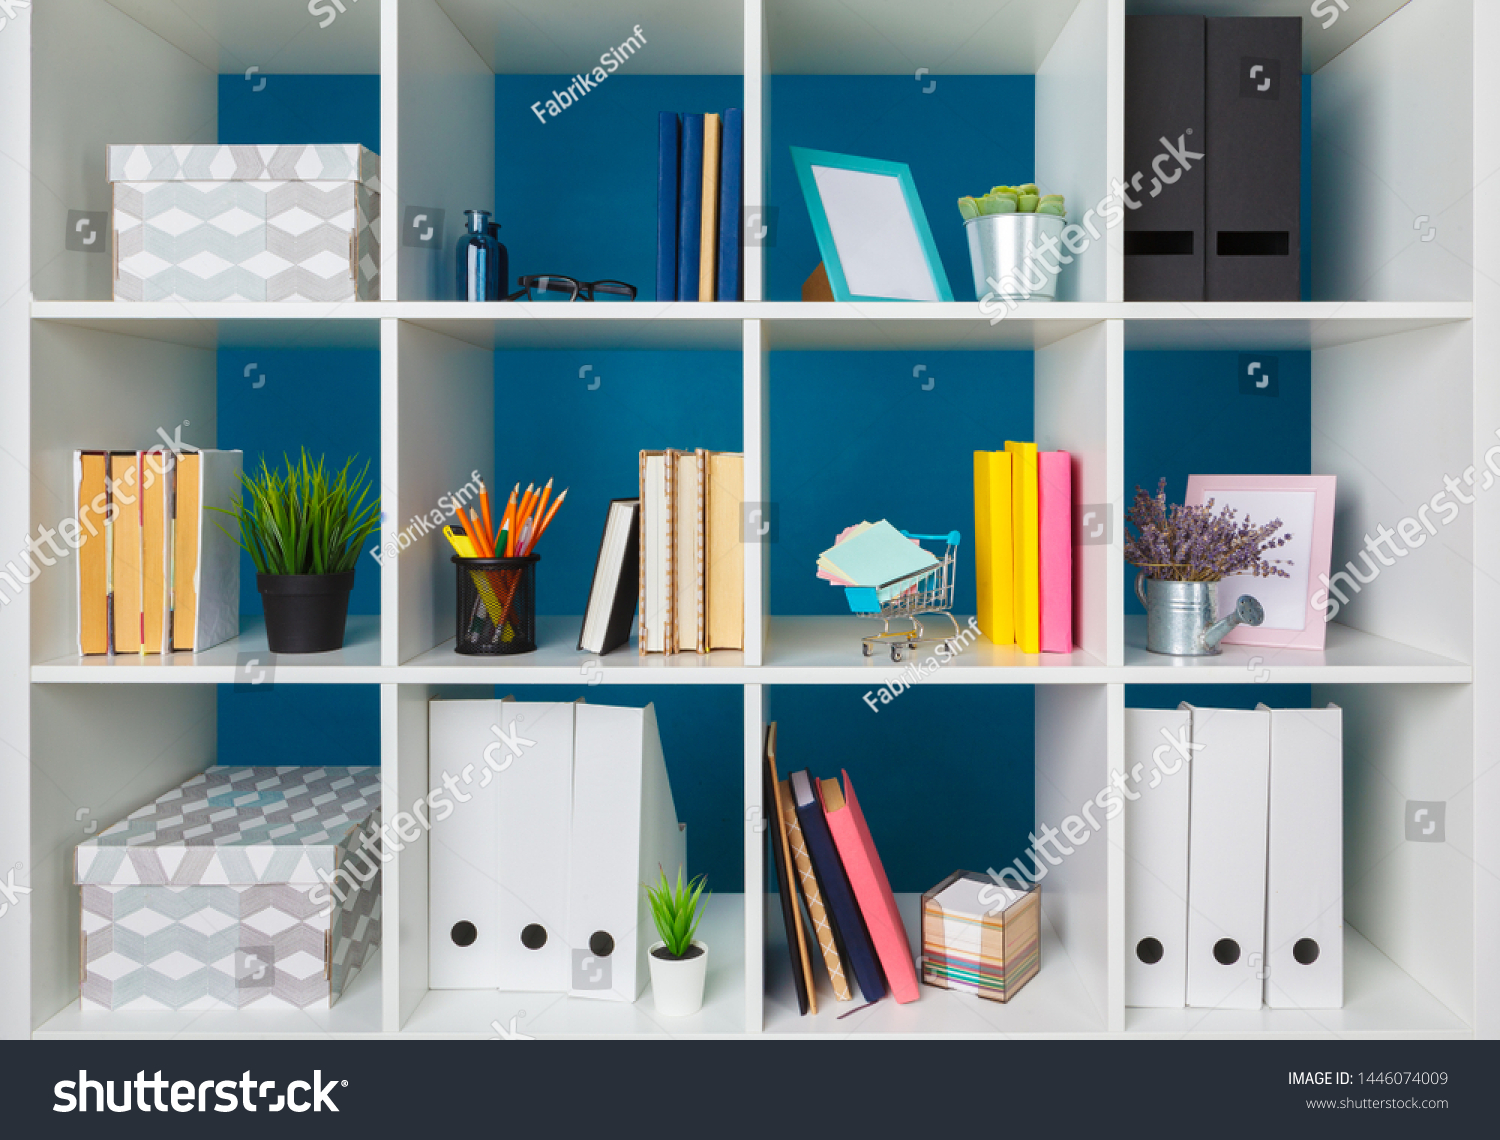 Stacks of supplies and paperwork in the office and bookshelves #1446074009